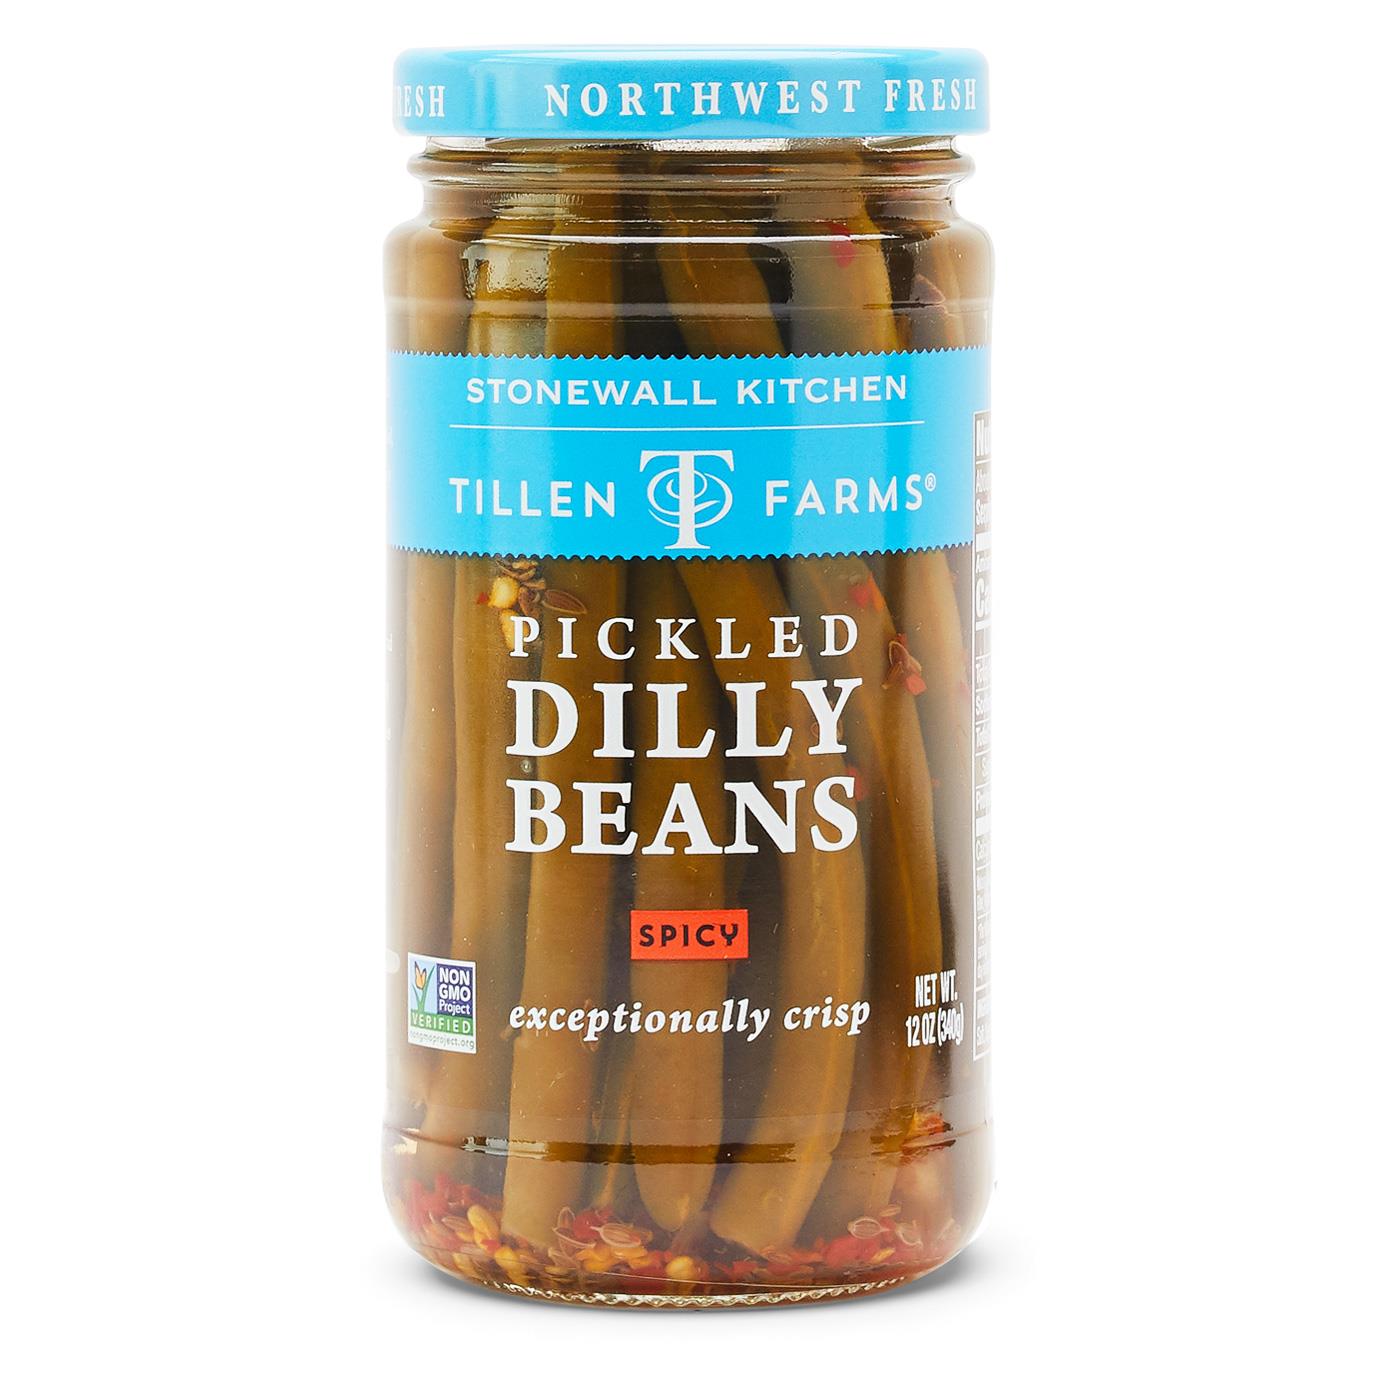 Pickled Spicy Beans